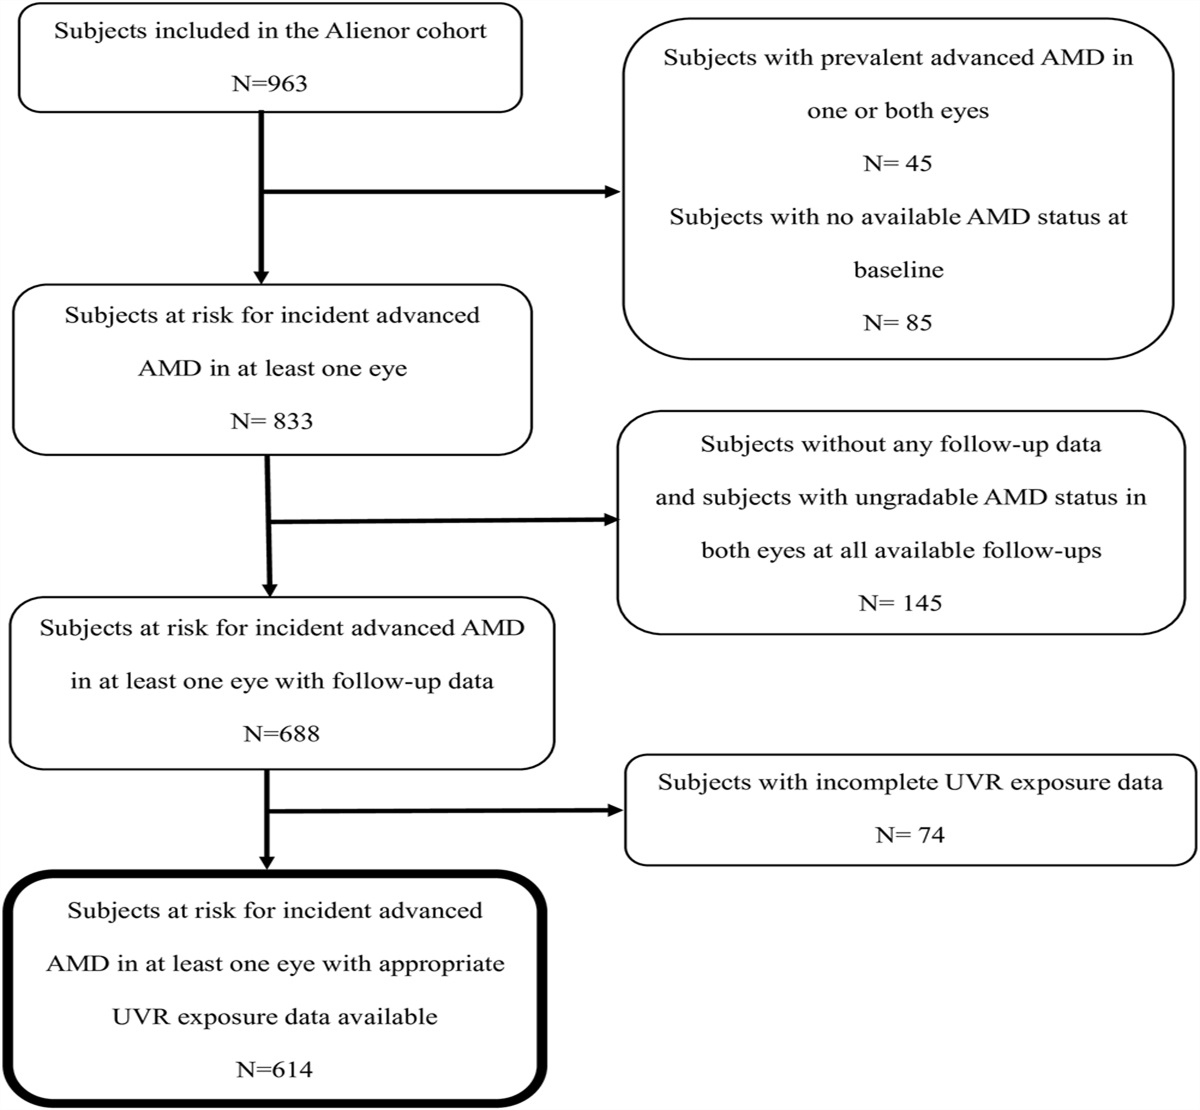 LIFETIME AMBIENT ULTRAVIOLET RADIATION EXPOSURE AND INCIDENCE OF AGE-RELATED MACULAR DEGENERATION